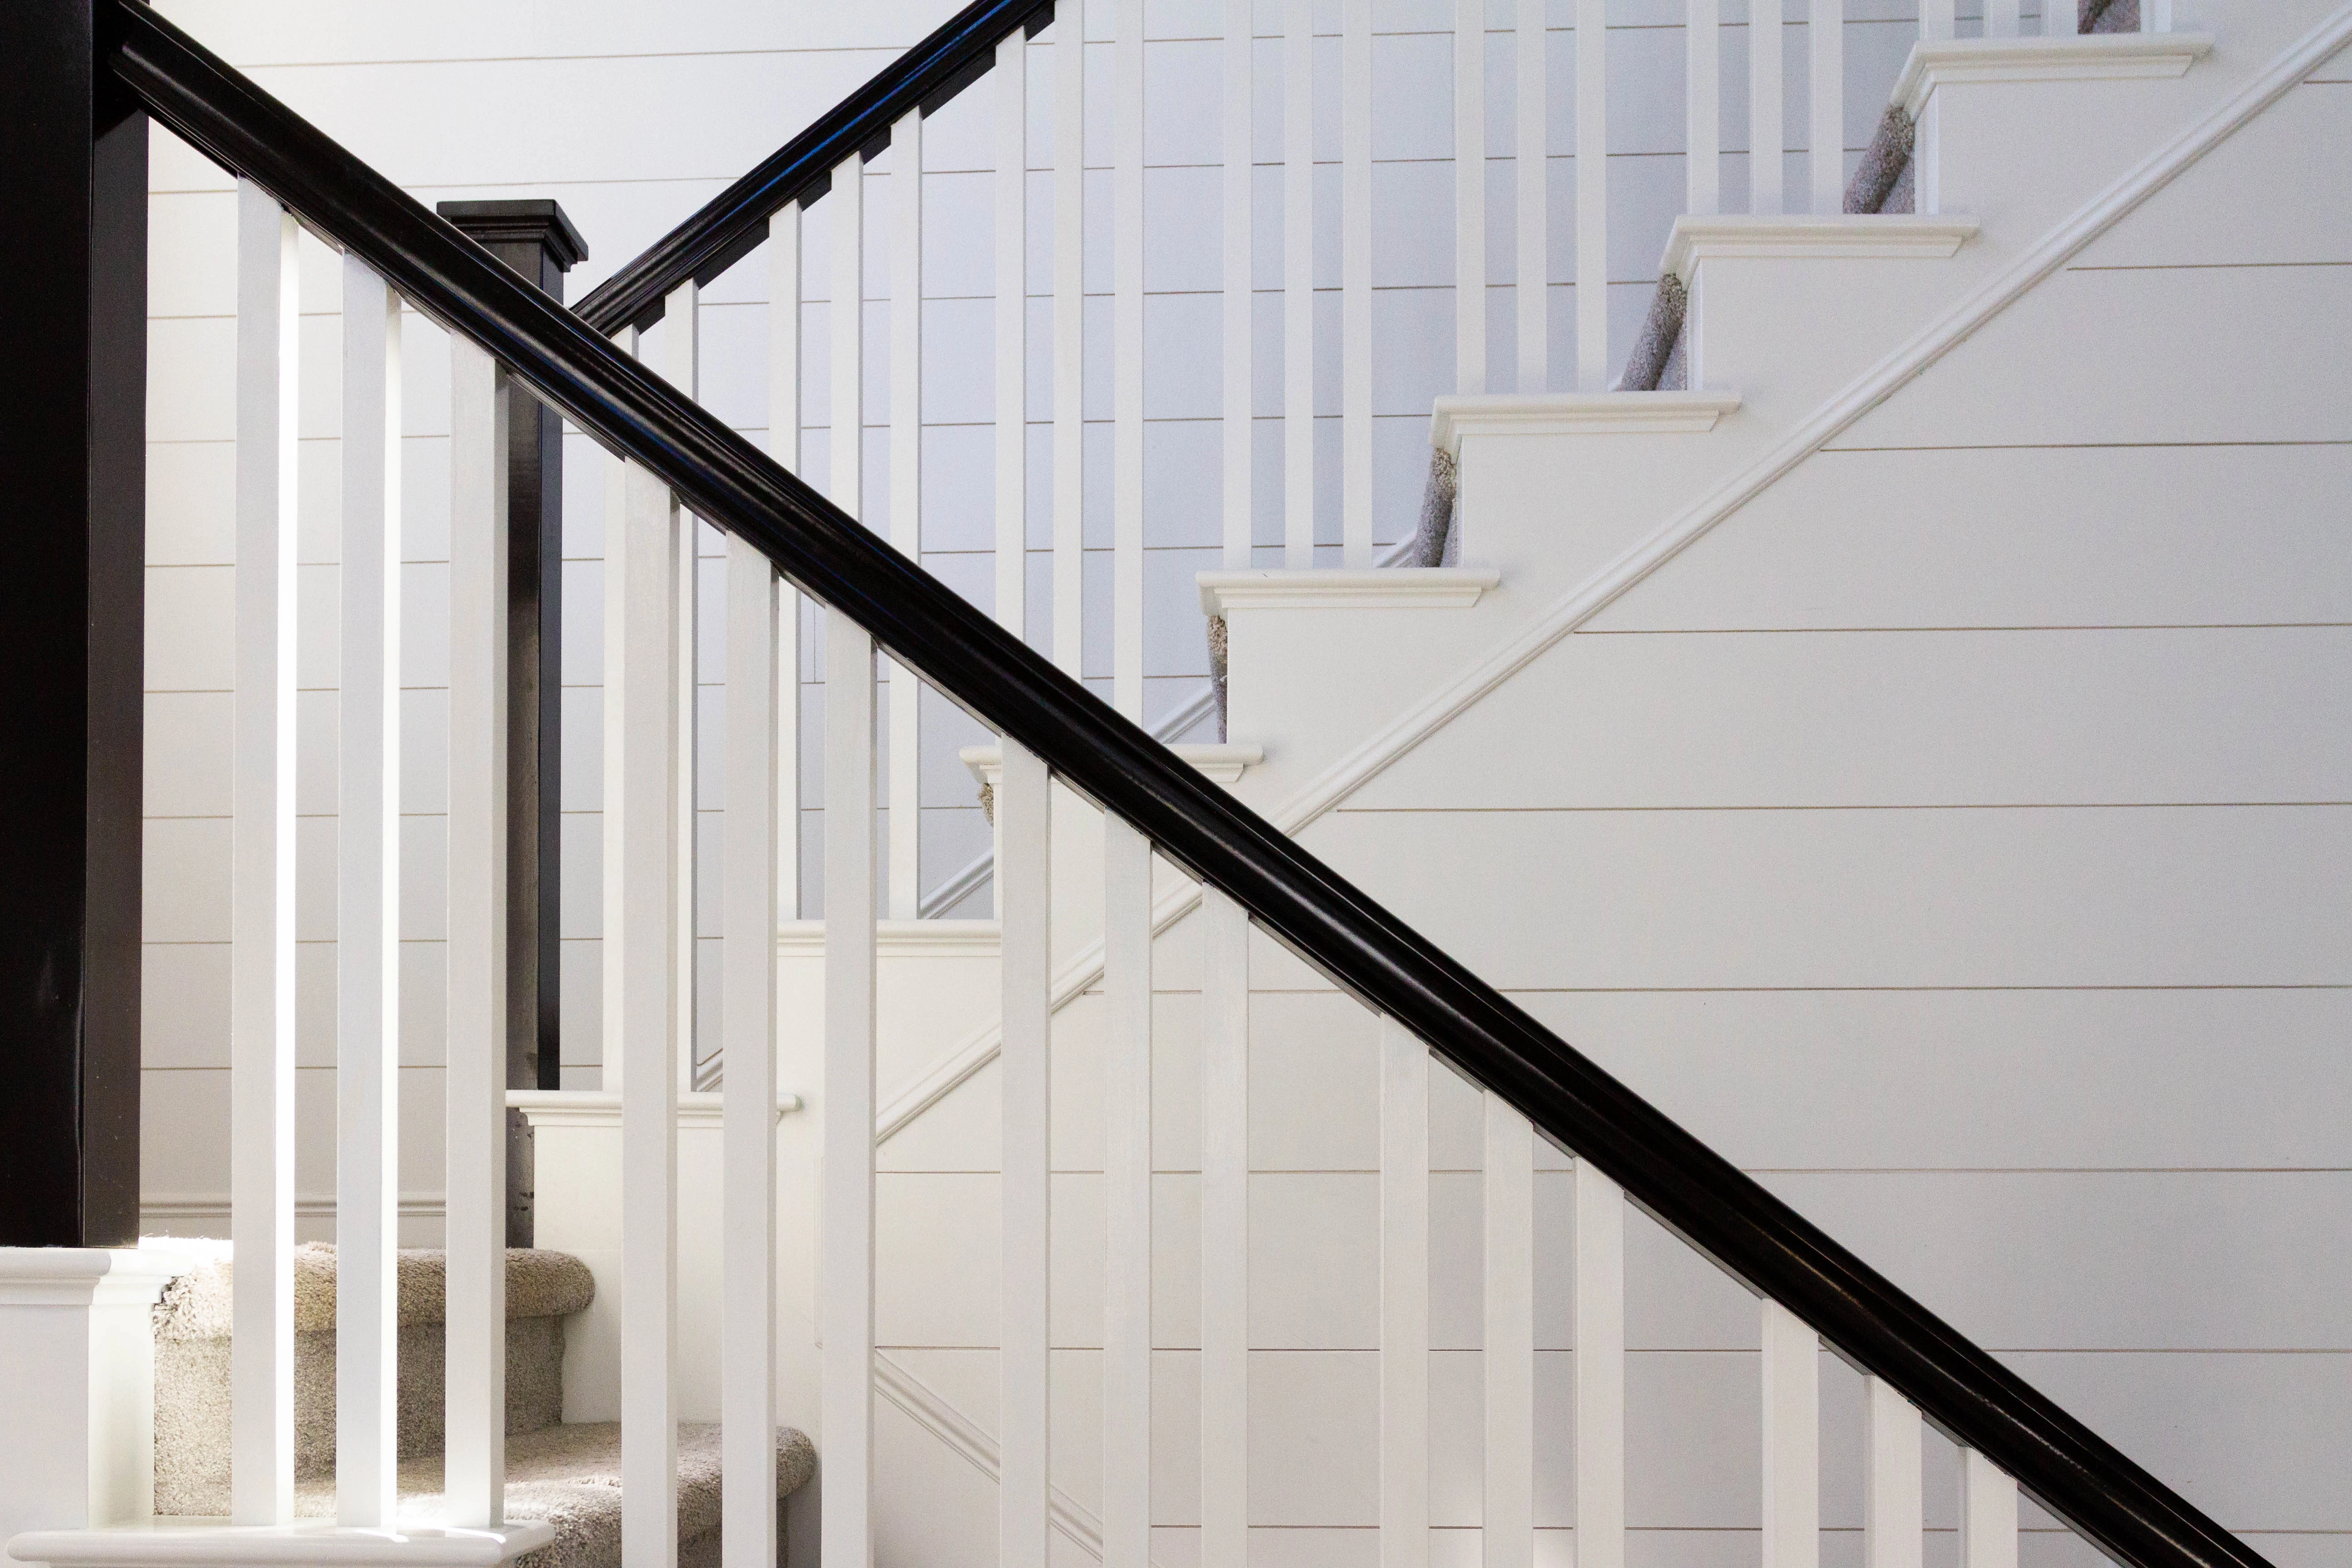 Carpeted half turn stairs with white paneled risers and walls, and black railing and post.